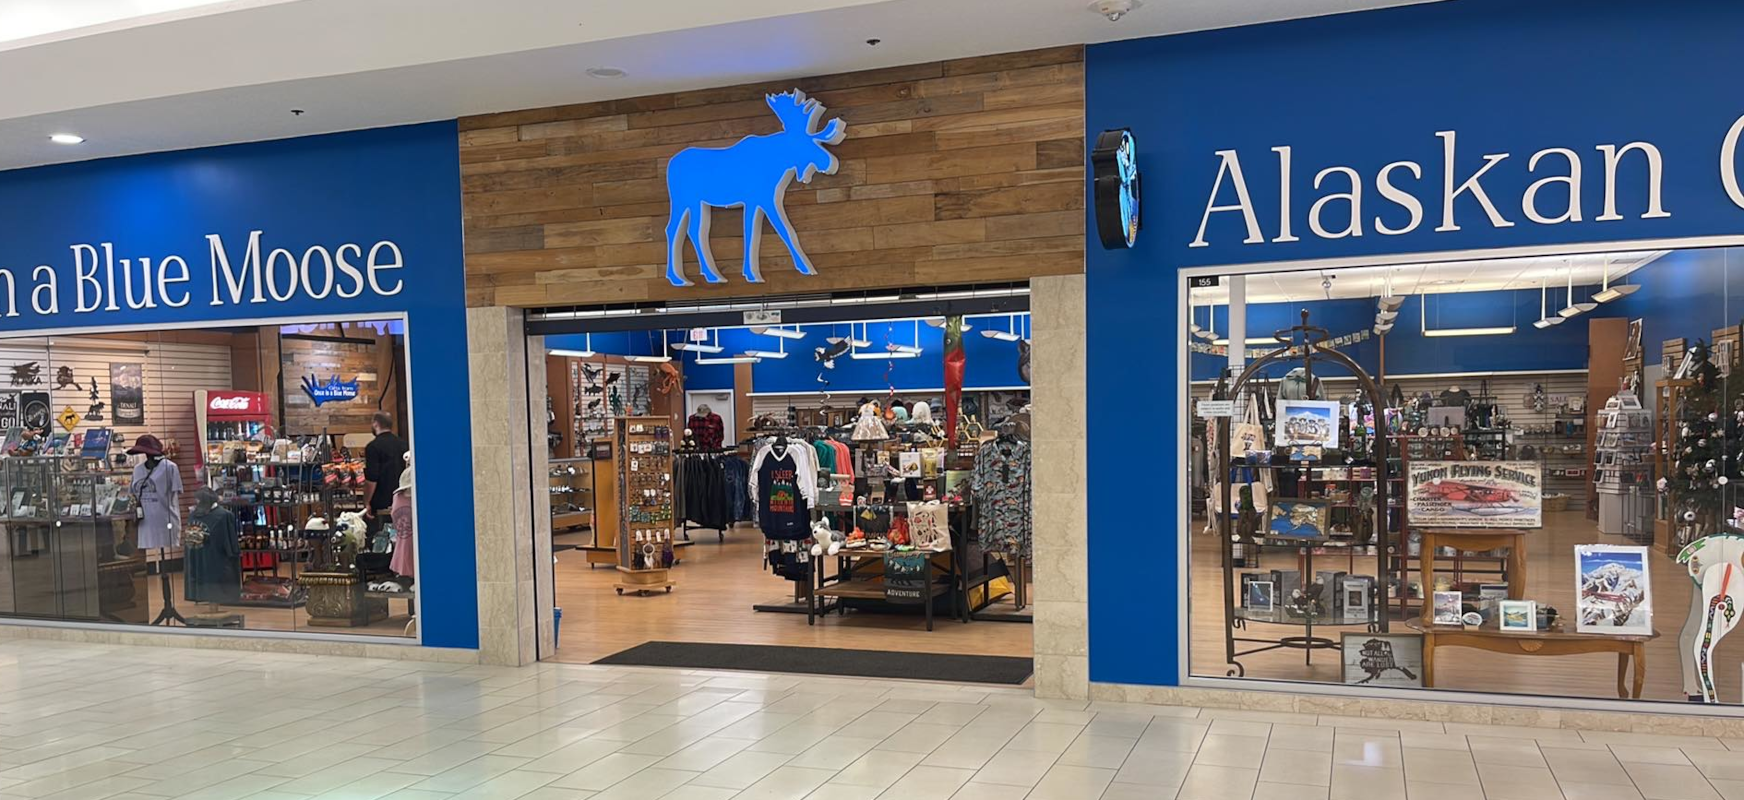 Picture of store of Once in a Blue Moose at the Dimond Center Mall in Anchorage Alaska.